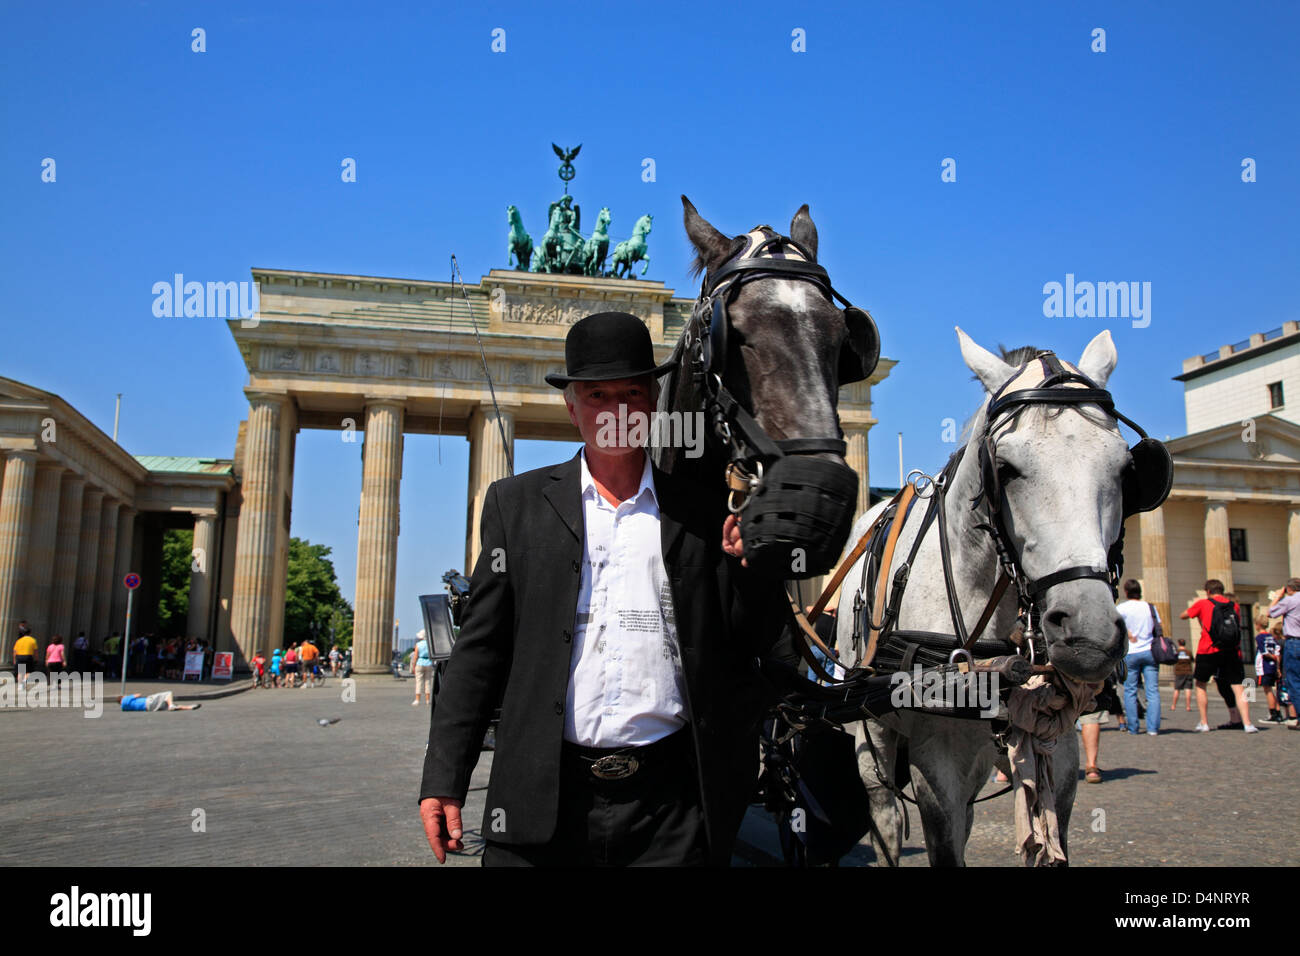 Coachman waiting for tourists with his carriage, Brandenburg Gate, Berlin, Germany Stock Photo